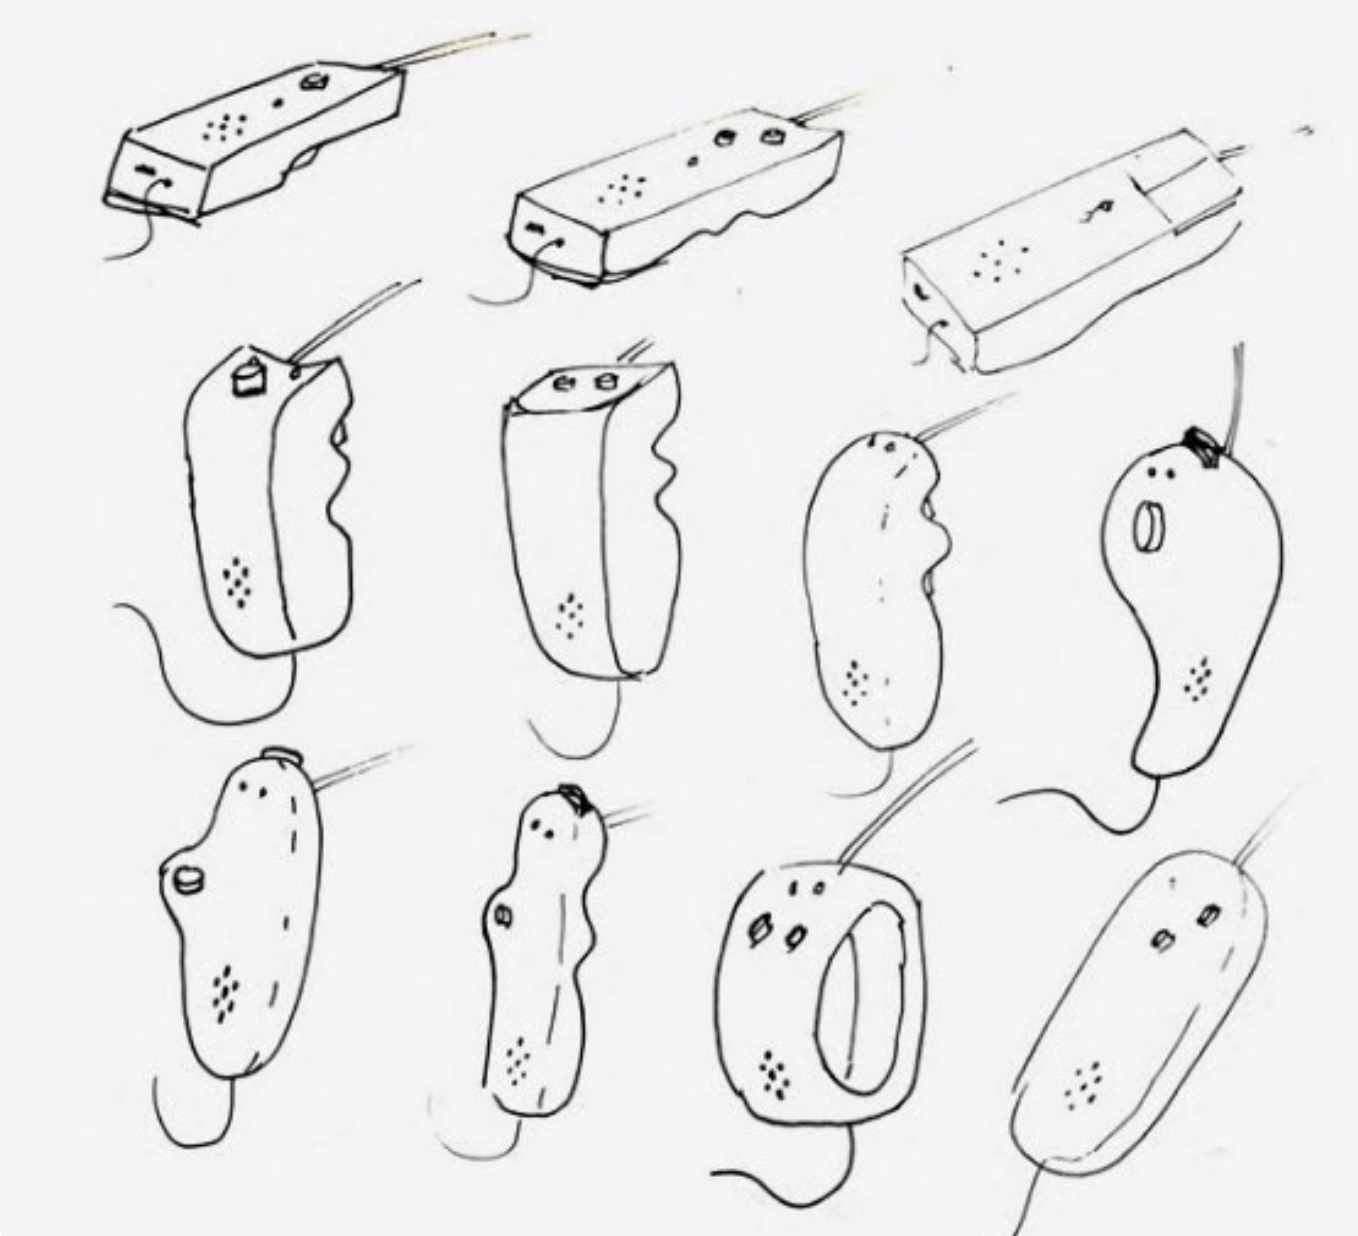  Initial concept and form generation for the controller design. 